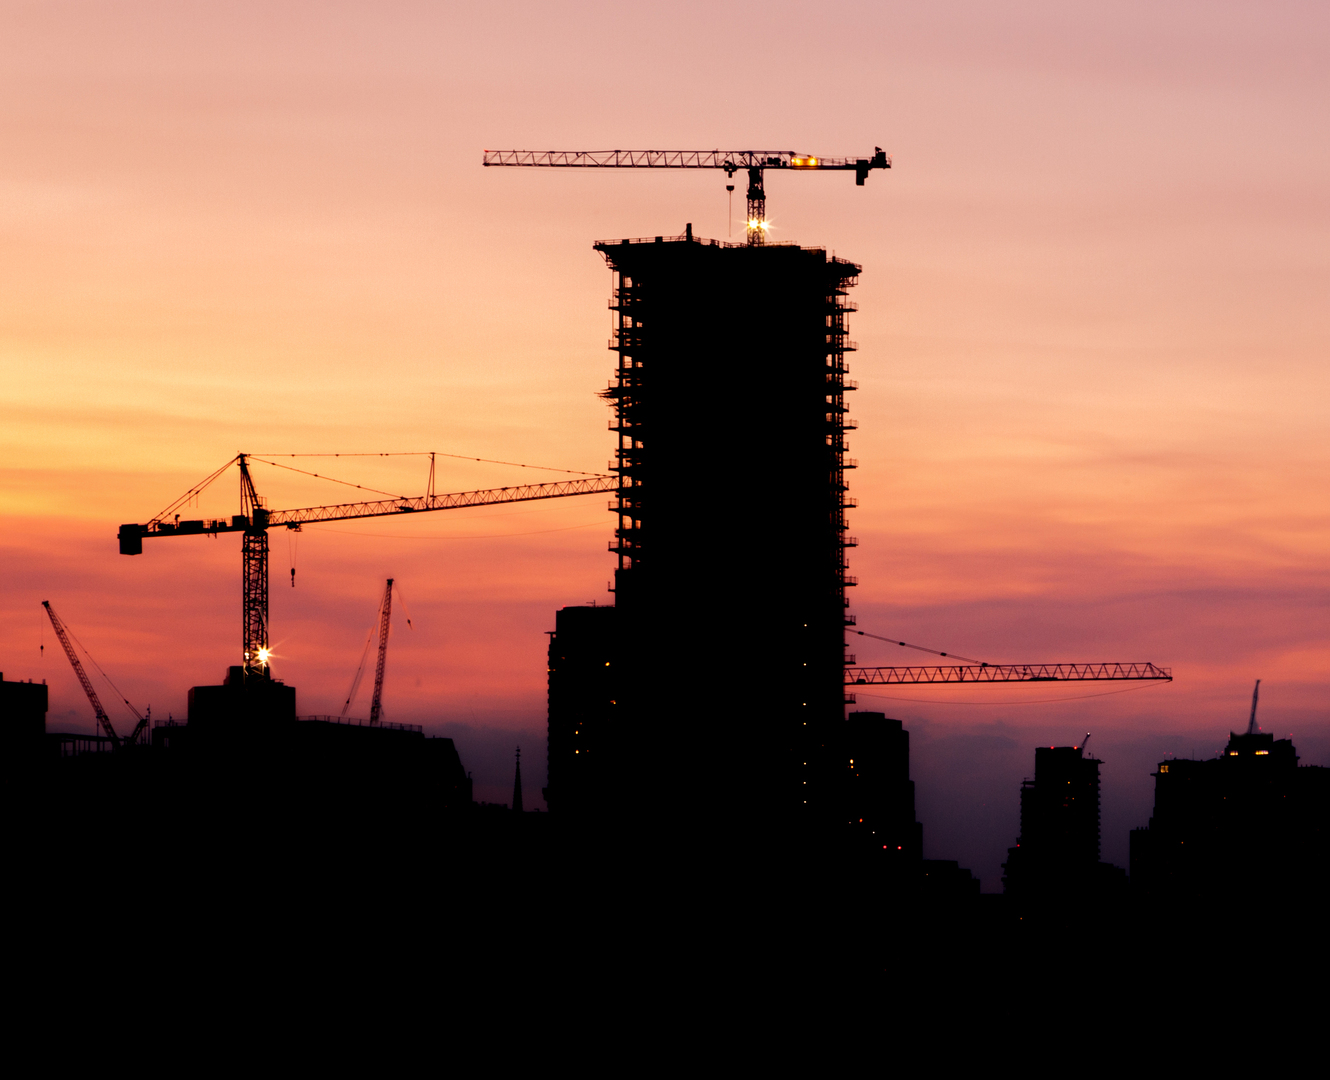 Sunset with cranes and a building under construction